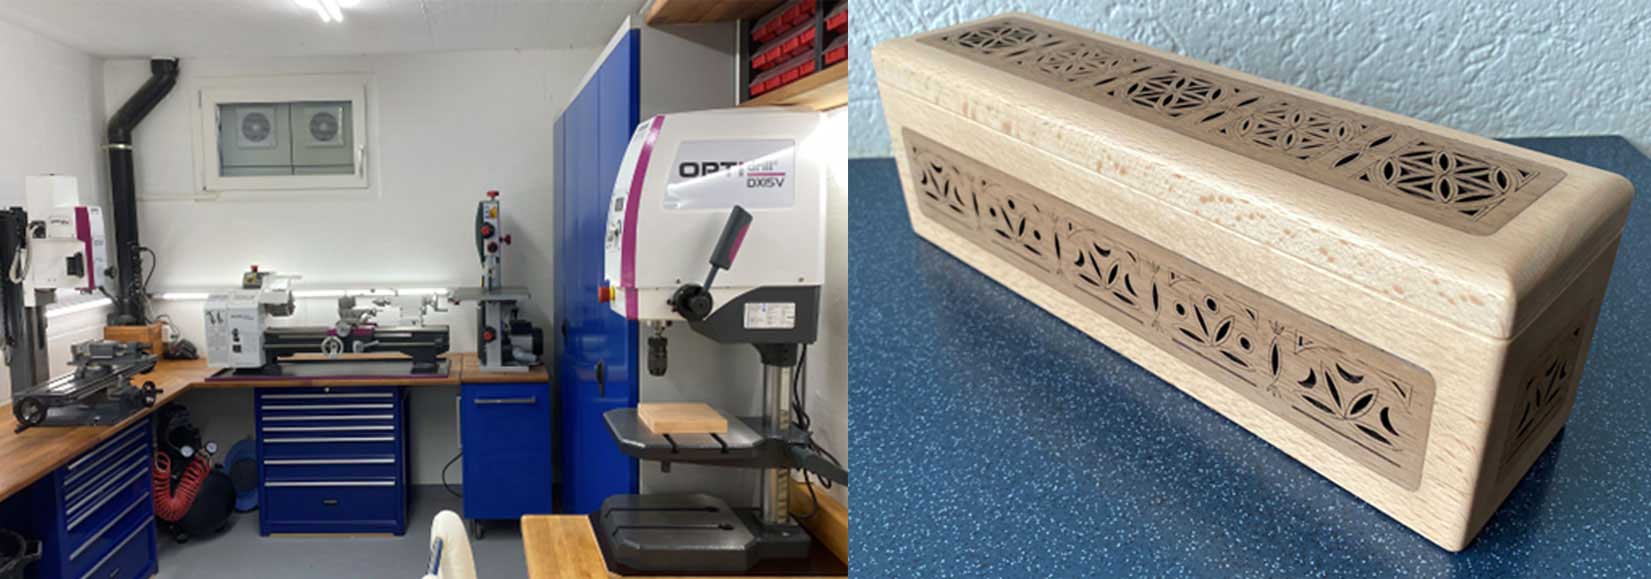 On the left the fully equipped workshop and on the right an Arabic incense box as an example of the precise work of the cutting laser.